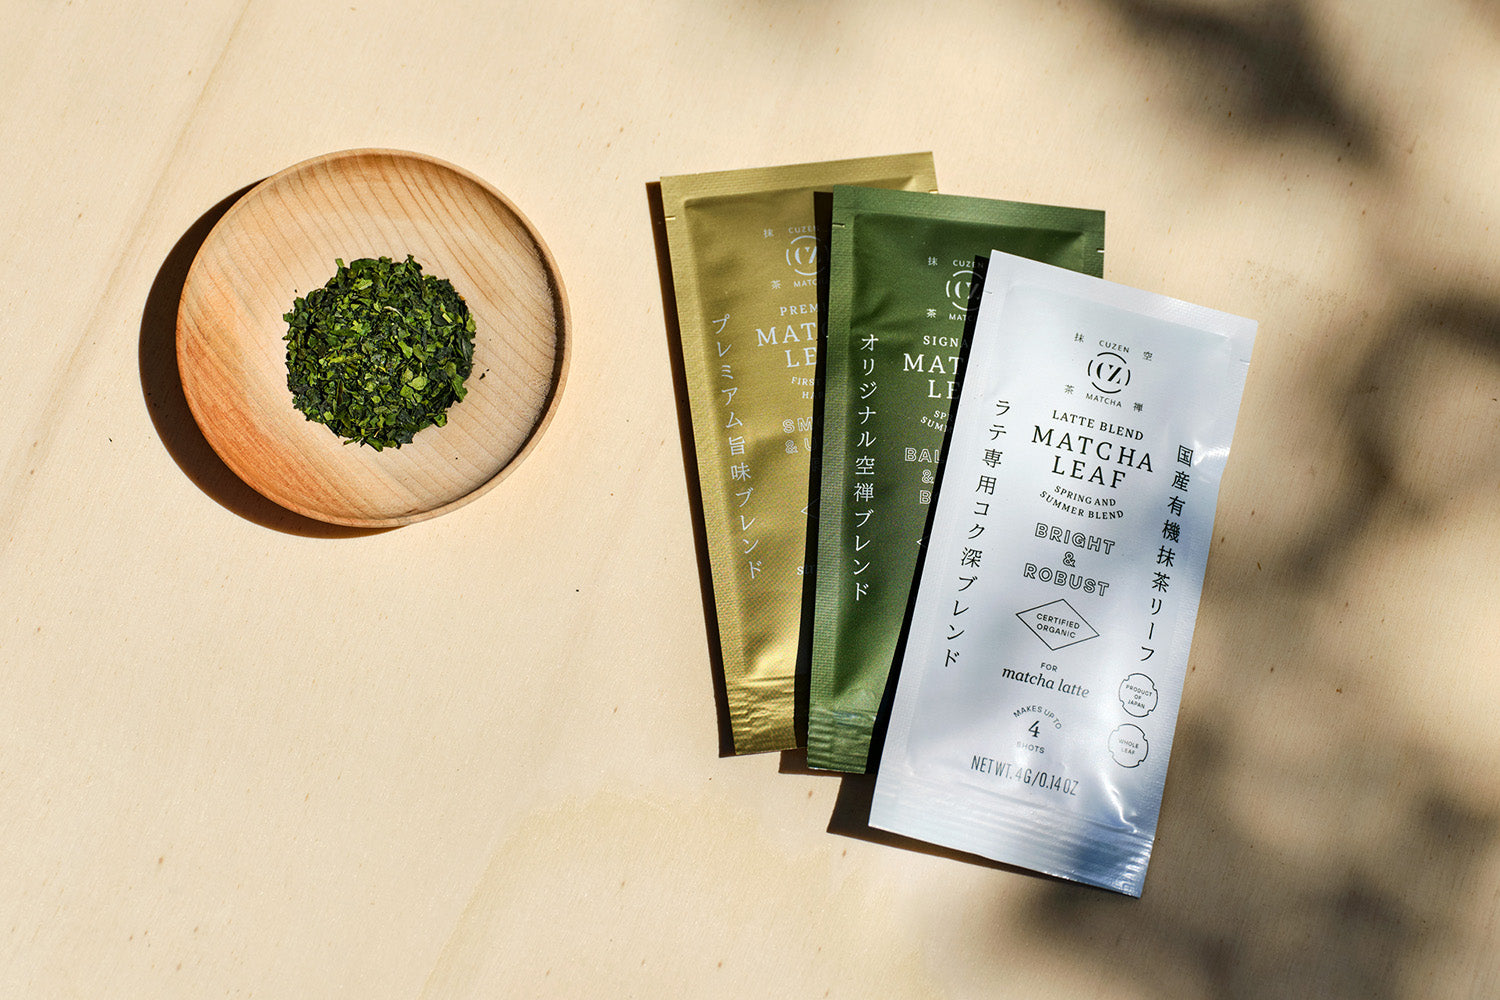 A wooden saucer full of whole tencha leaves, next to three packets of Cuzen whole leaf matcha: Premium, Latte Blend and Signature.